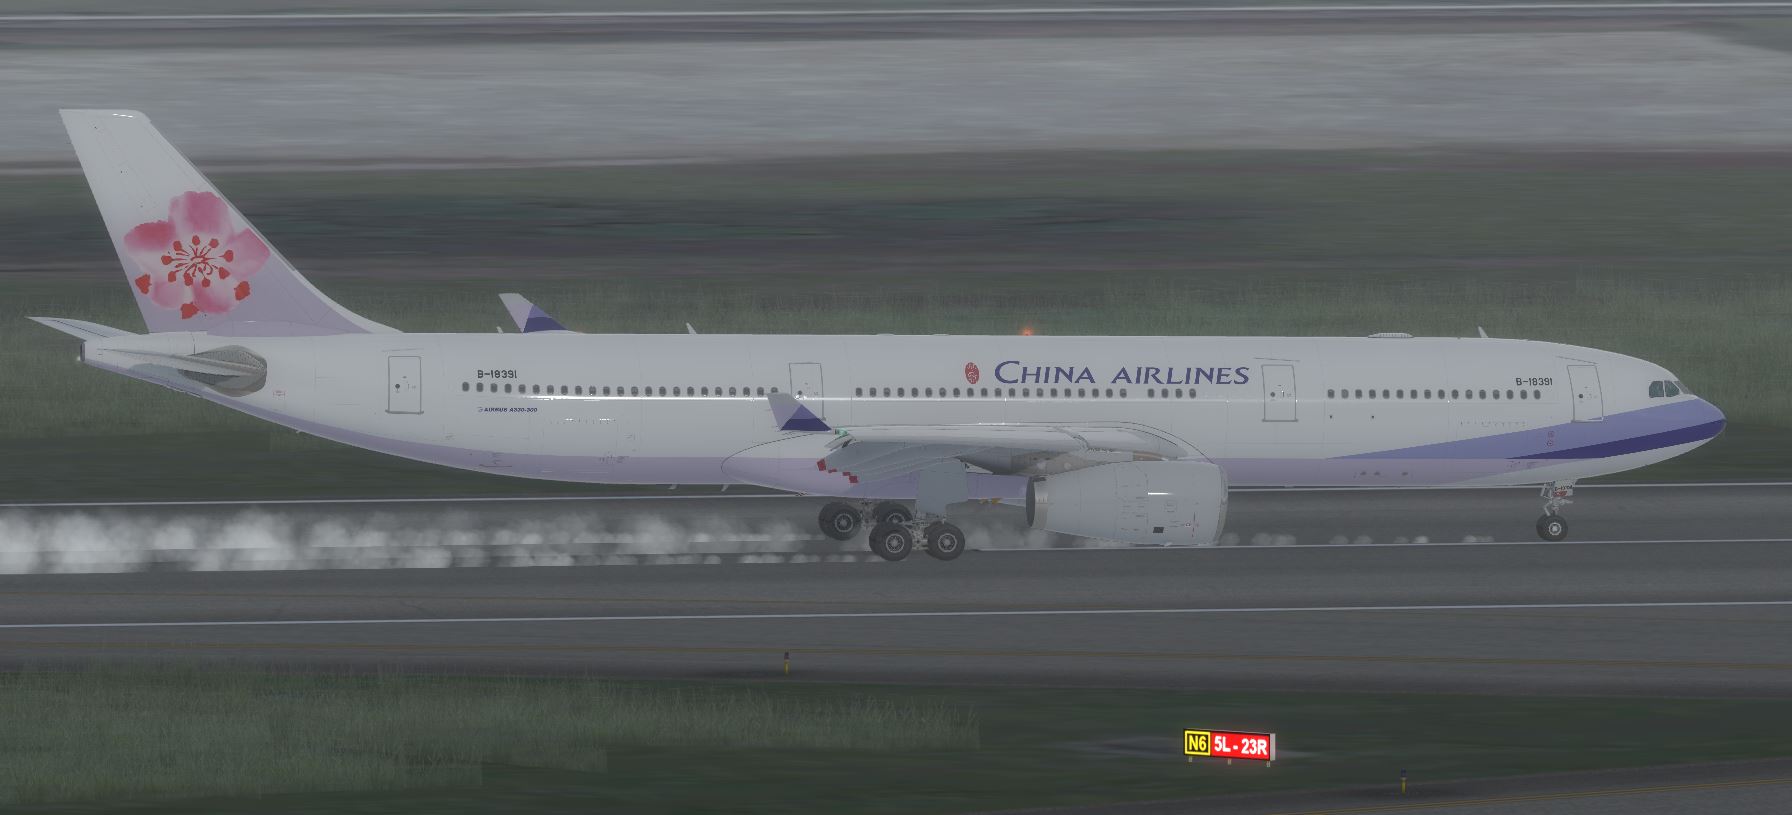 AS A330 ChinaAirline-76 